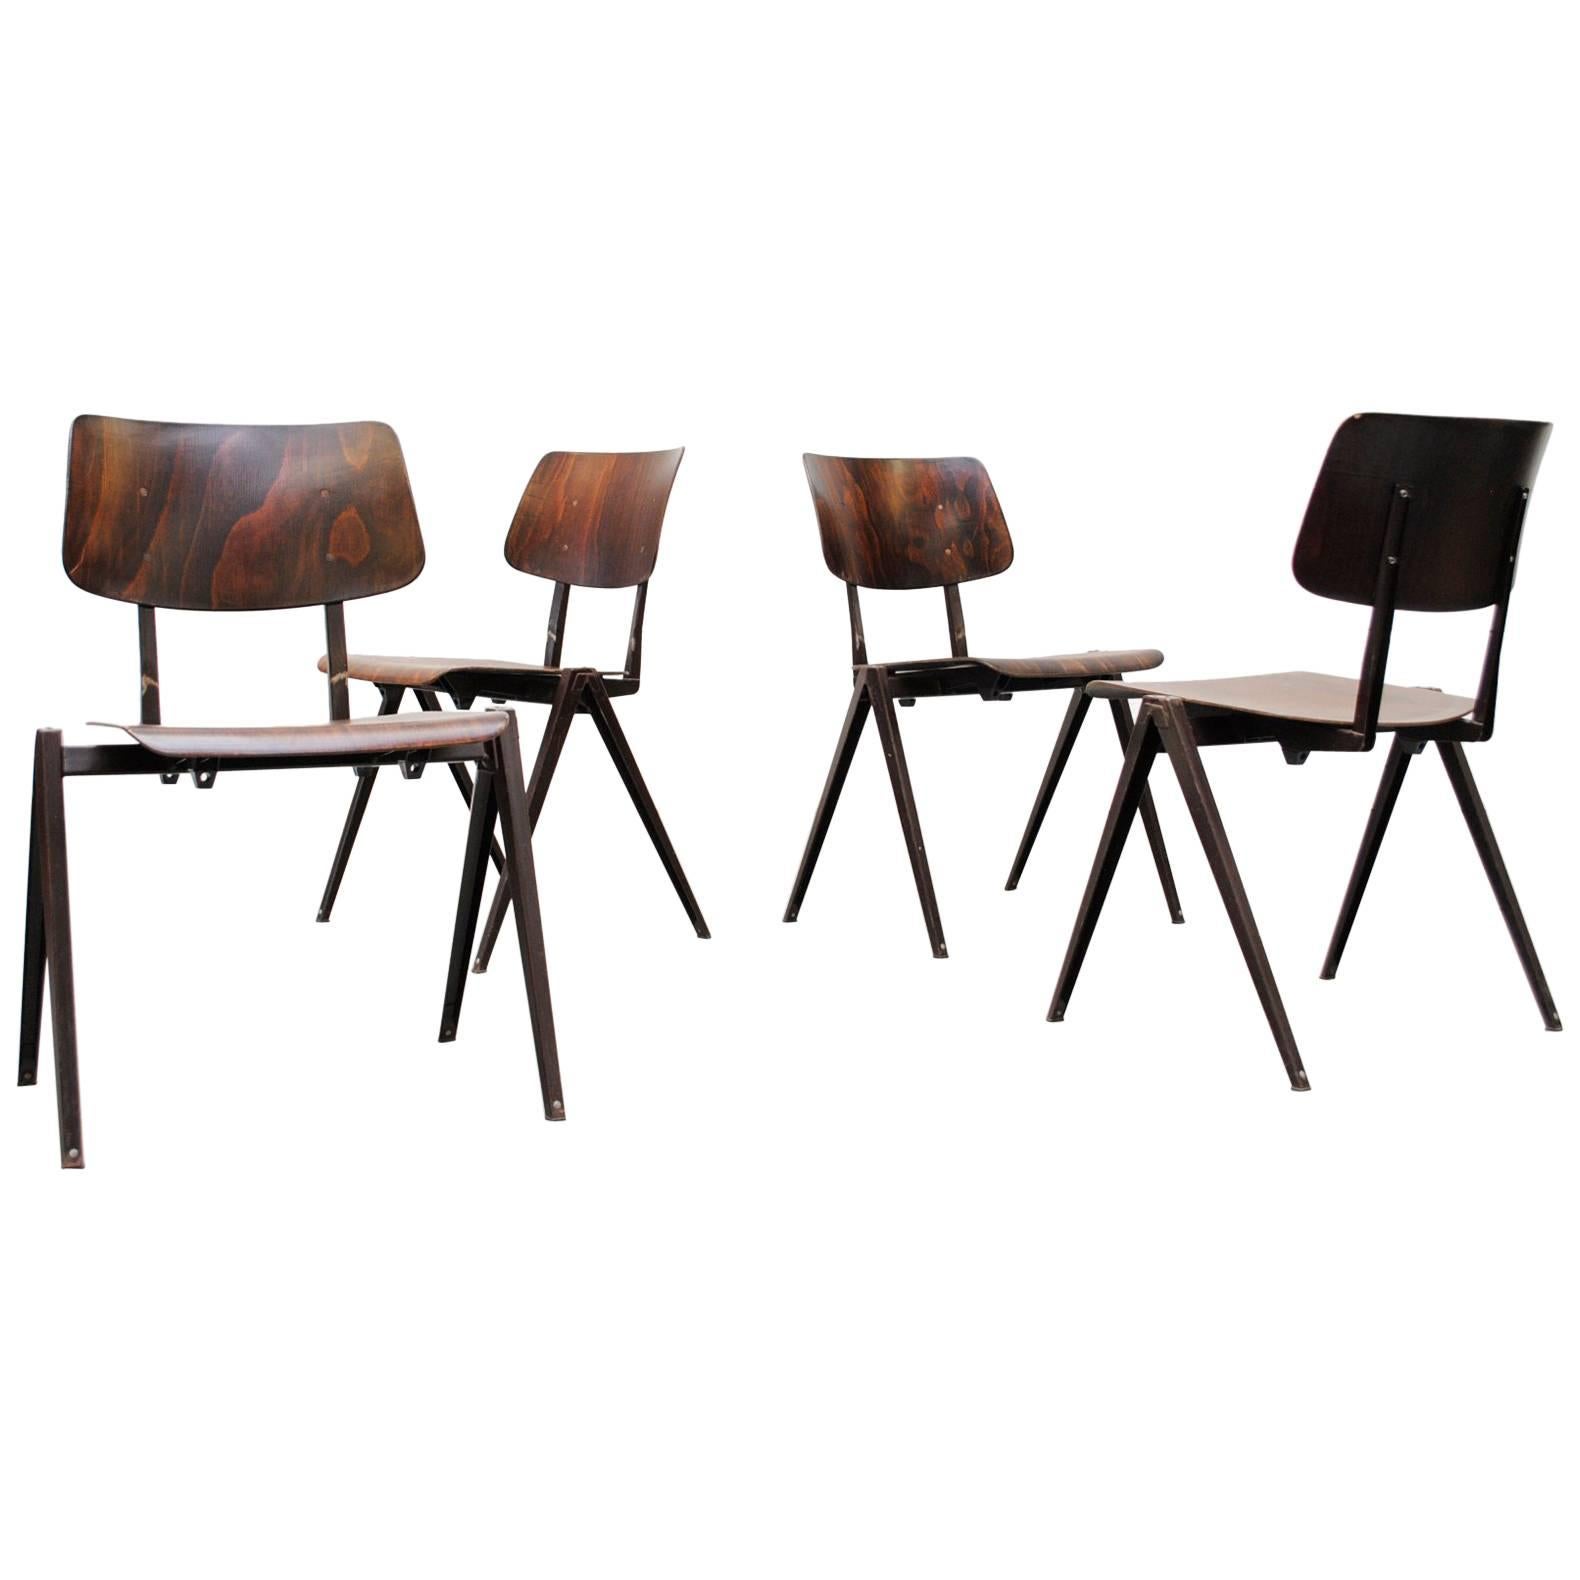 Set of Four Prouve Inspired Wenge Stacking School Chairs